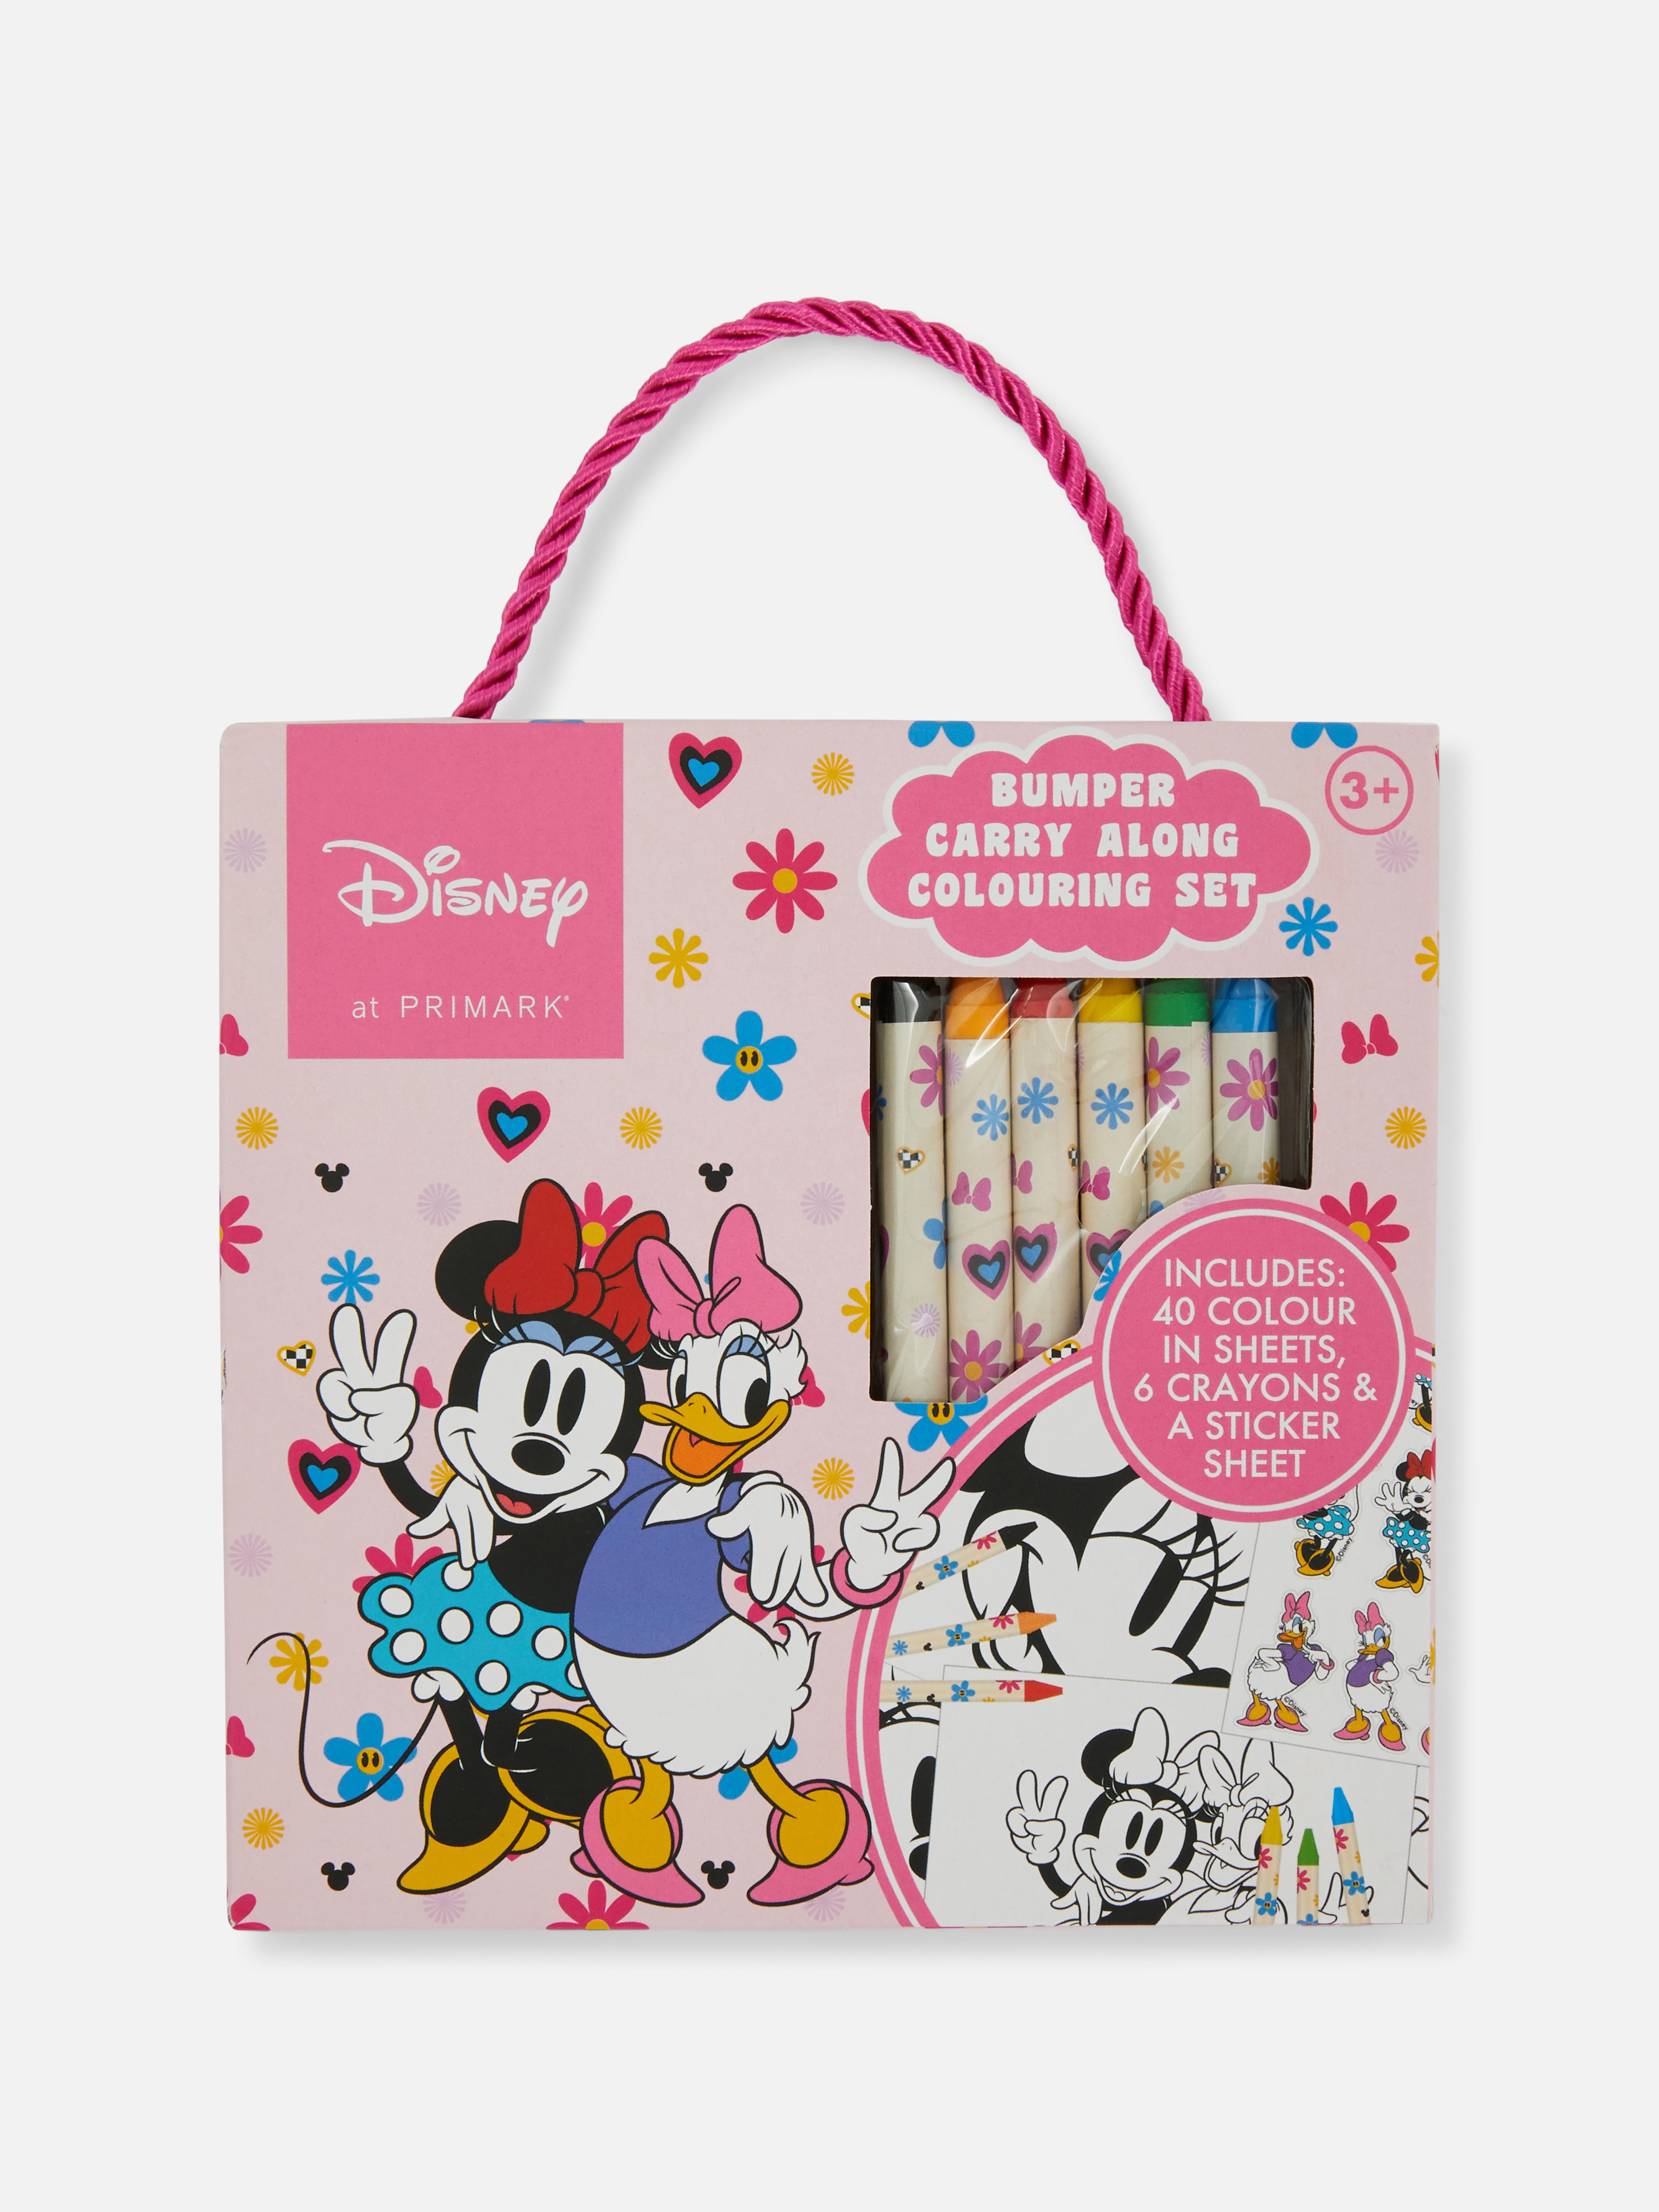 Disney’s Minnie Mouse and Daisy Duck Carry-Along Colouring Set Pink